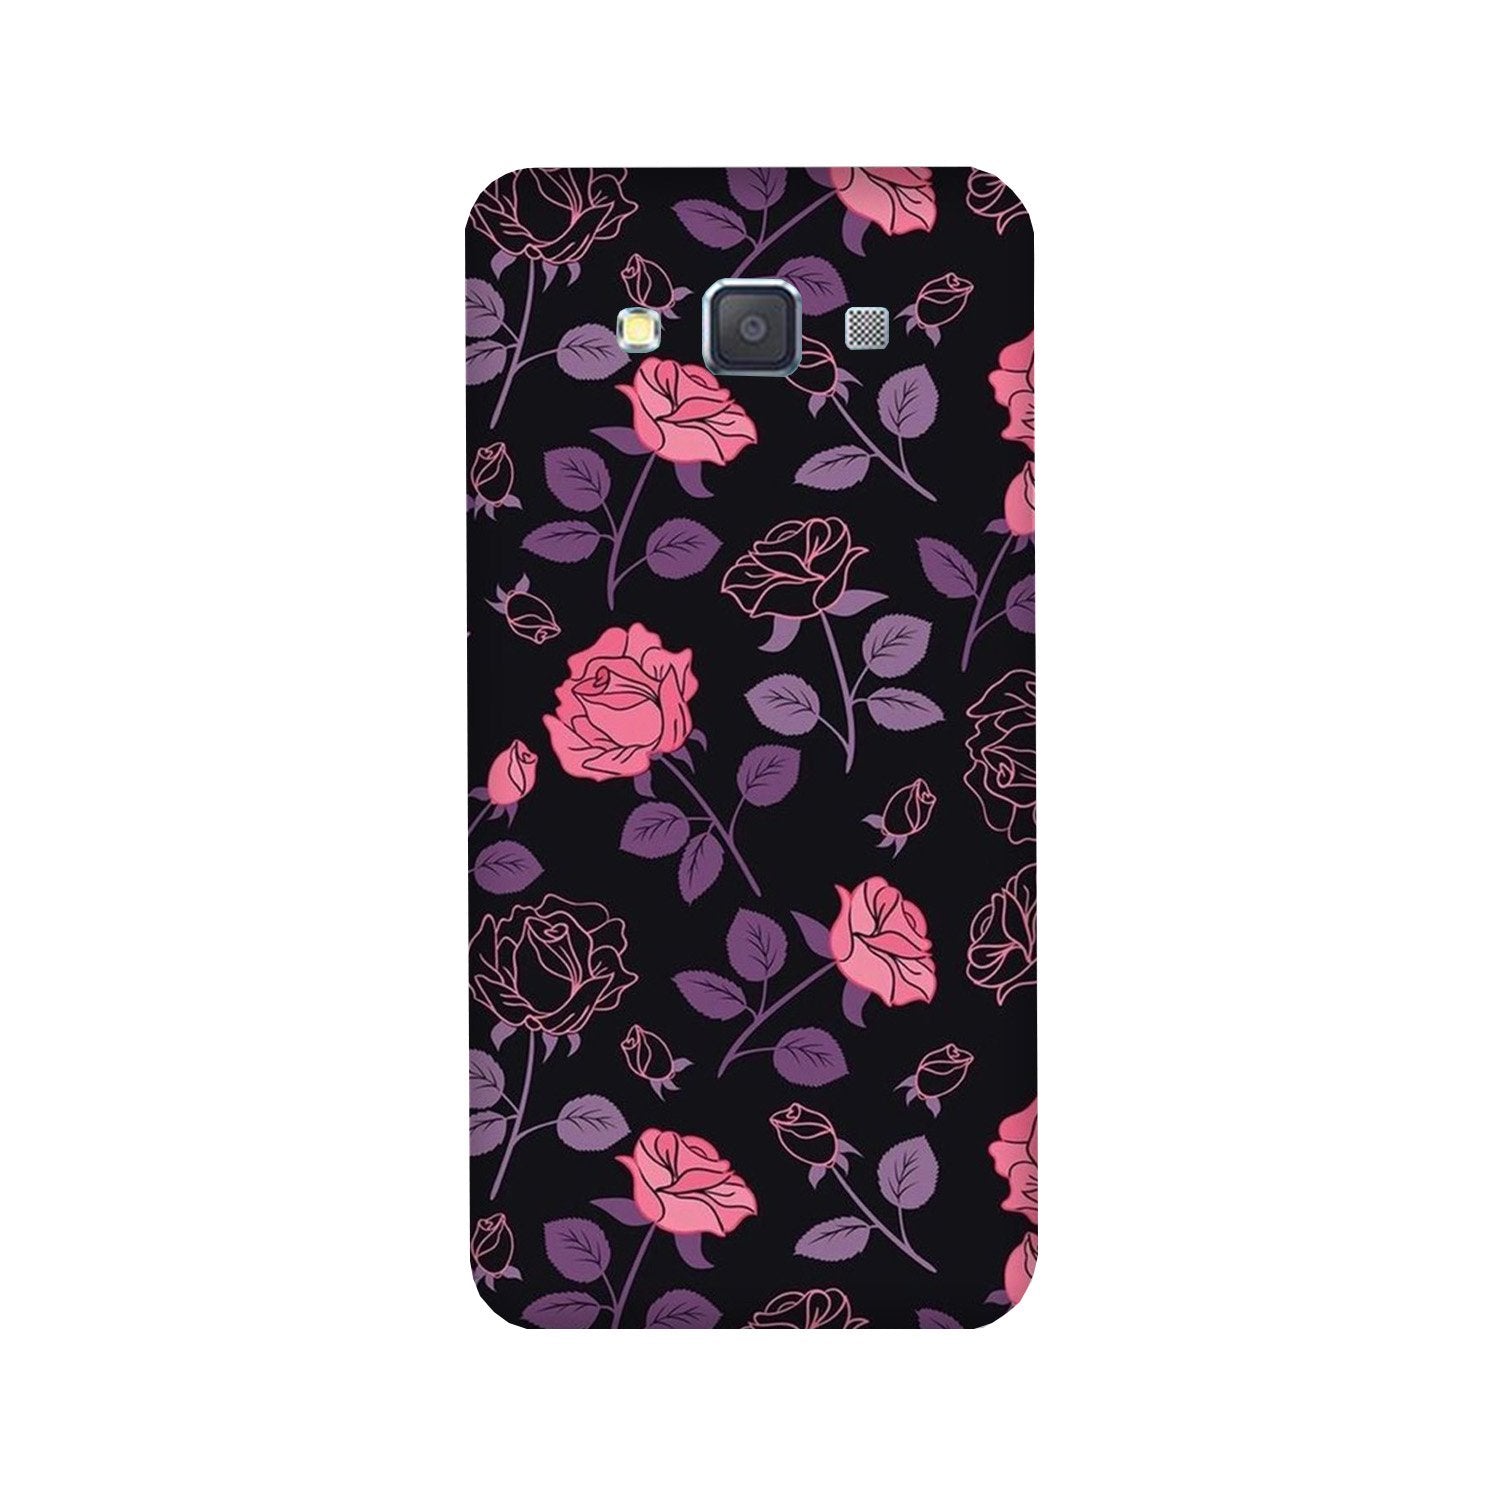 Rose Pattern Case for Galaxy J5 (2016)